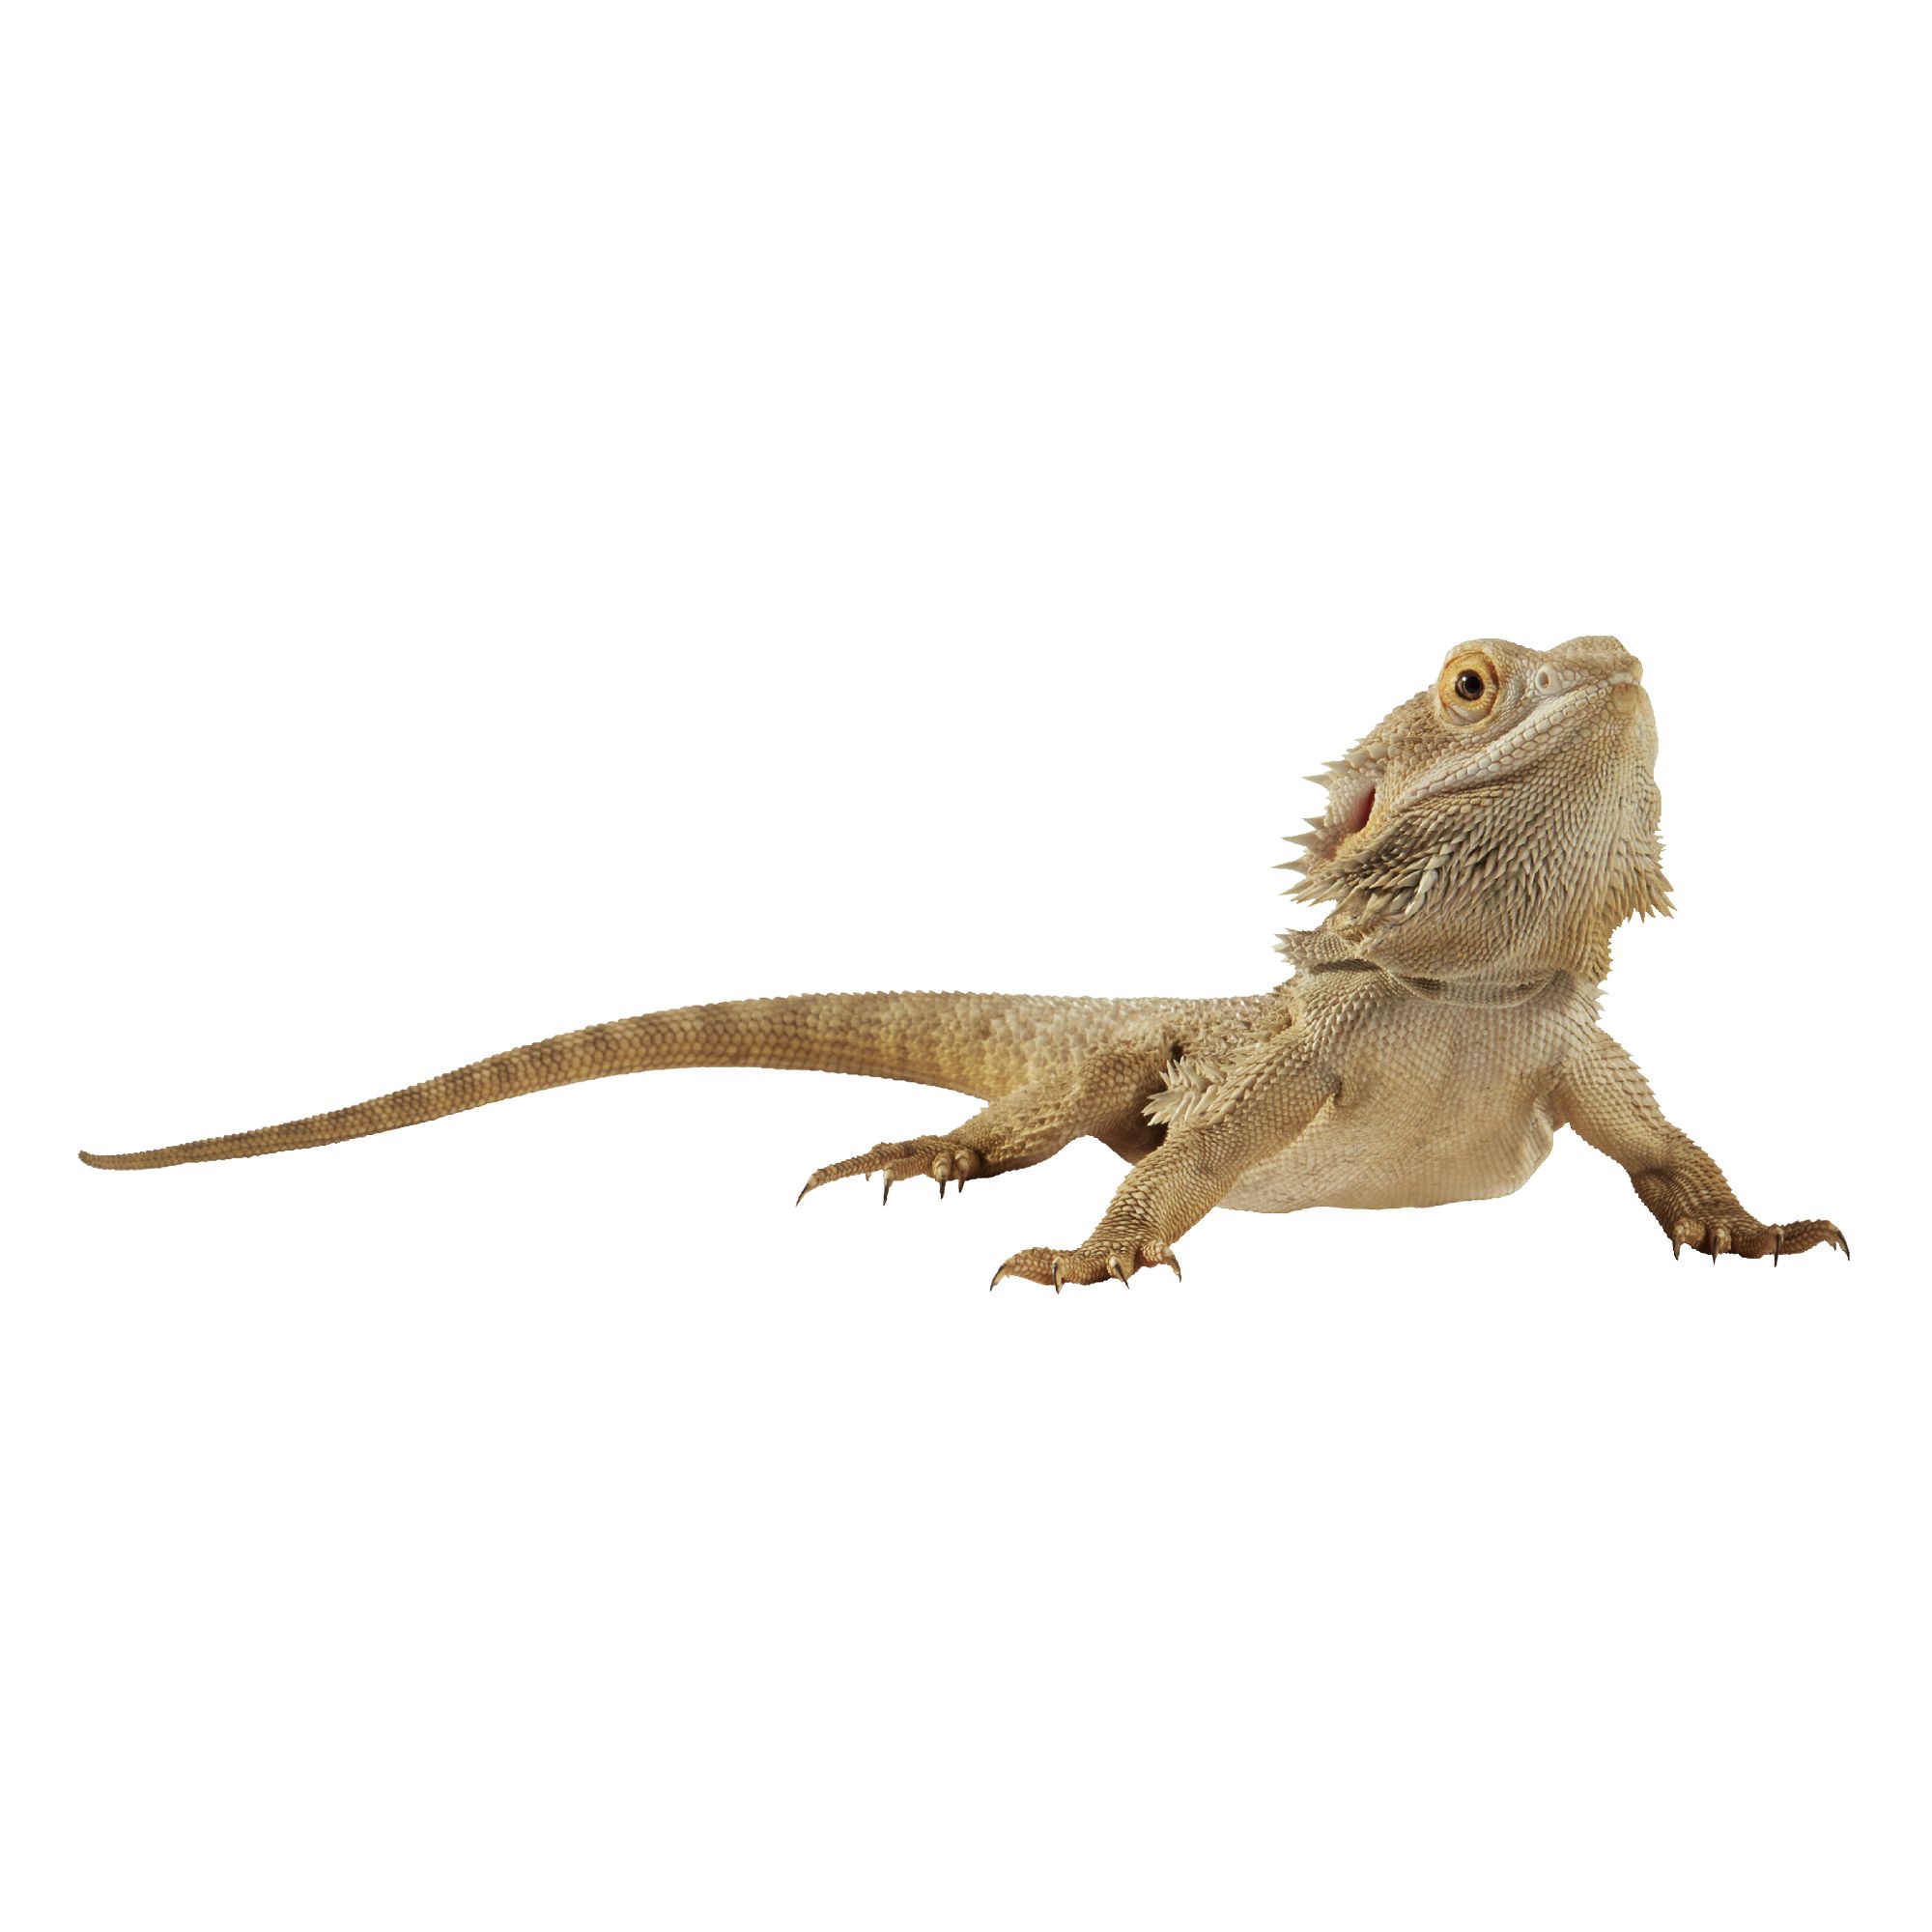 Is It Good To Get A Bearded Dragon From Petsmart?